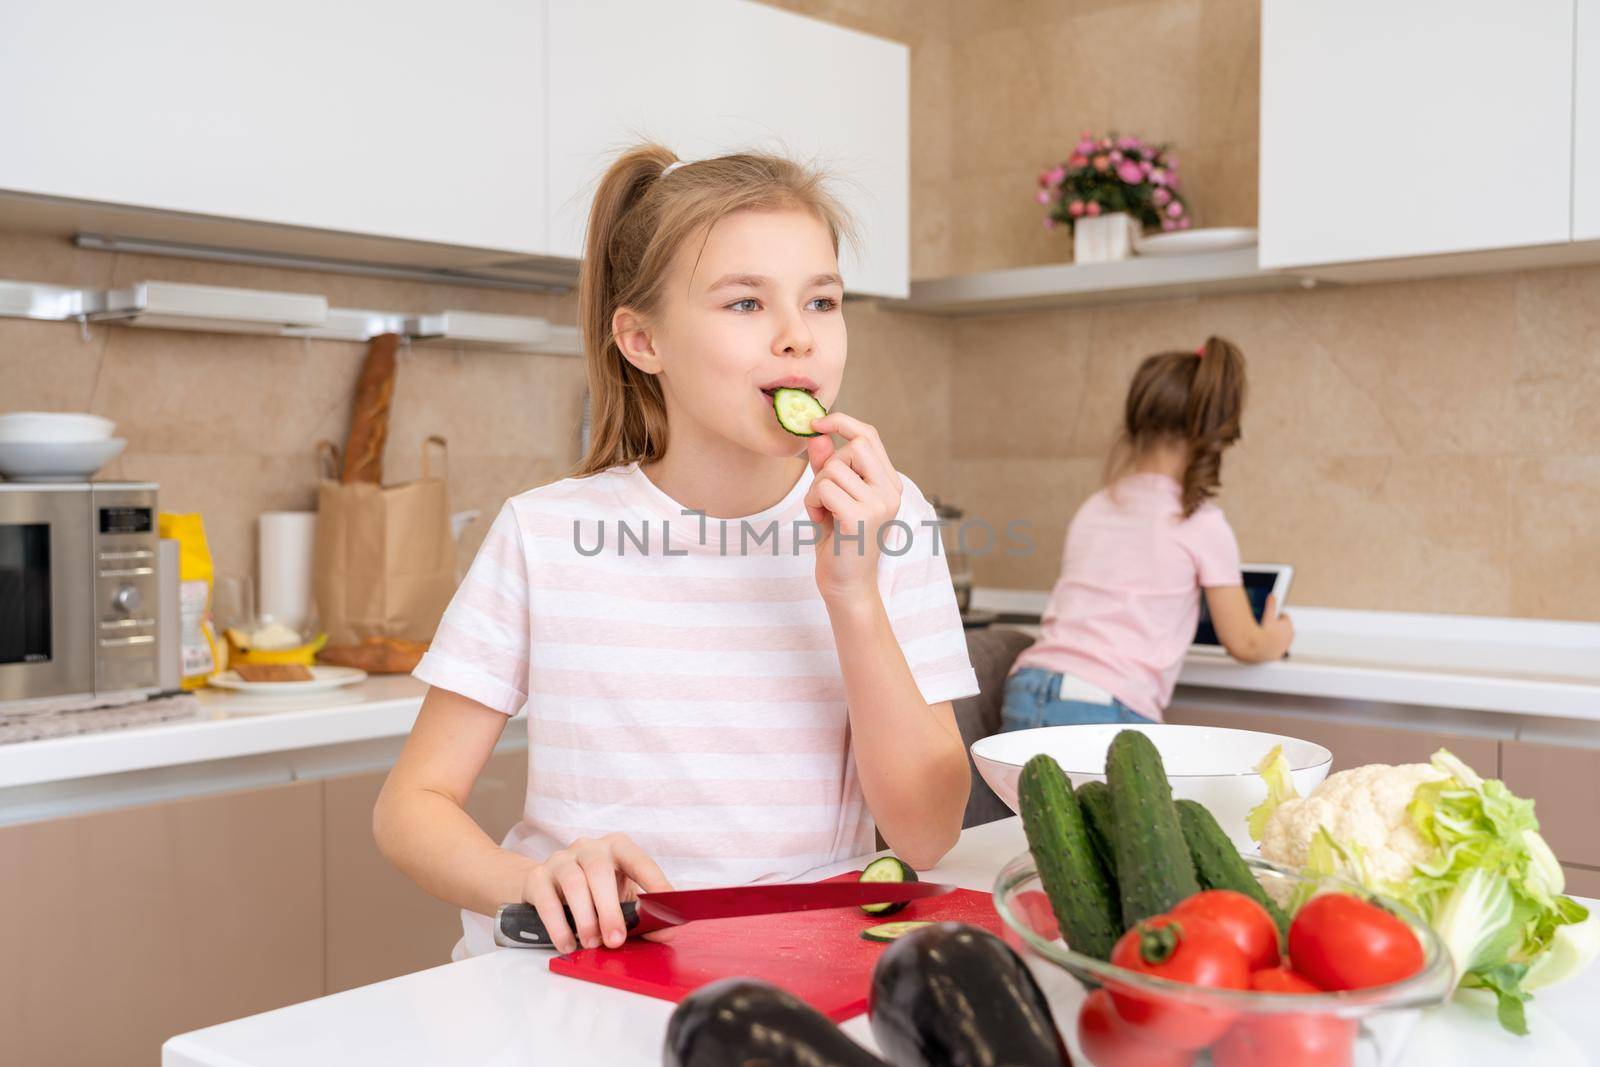 Preteen girl cutting and eating cucumber with knife on a table in kitchen by Mariakray